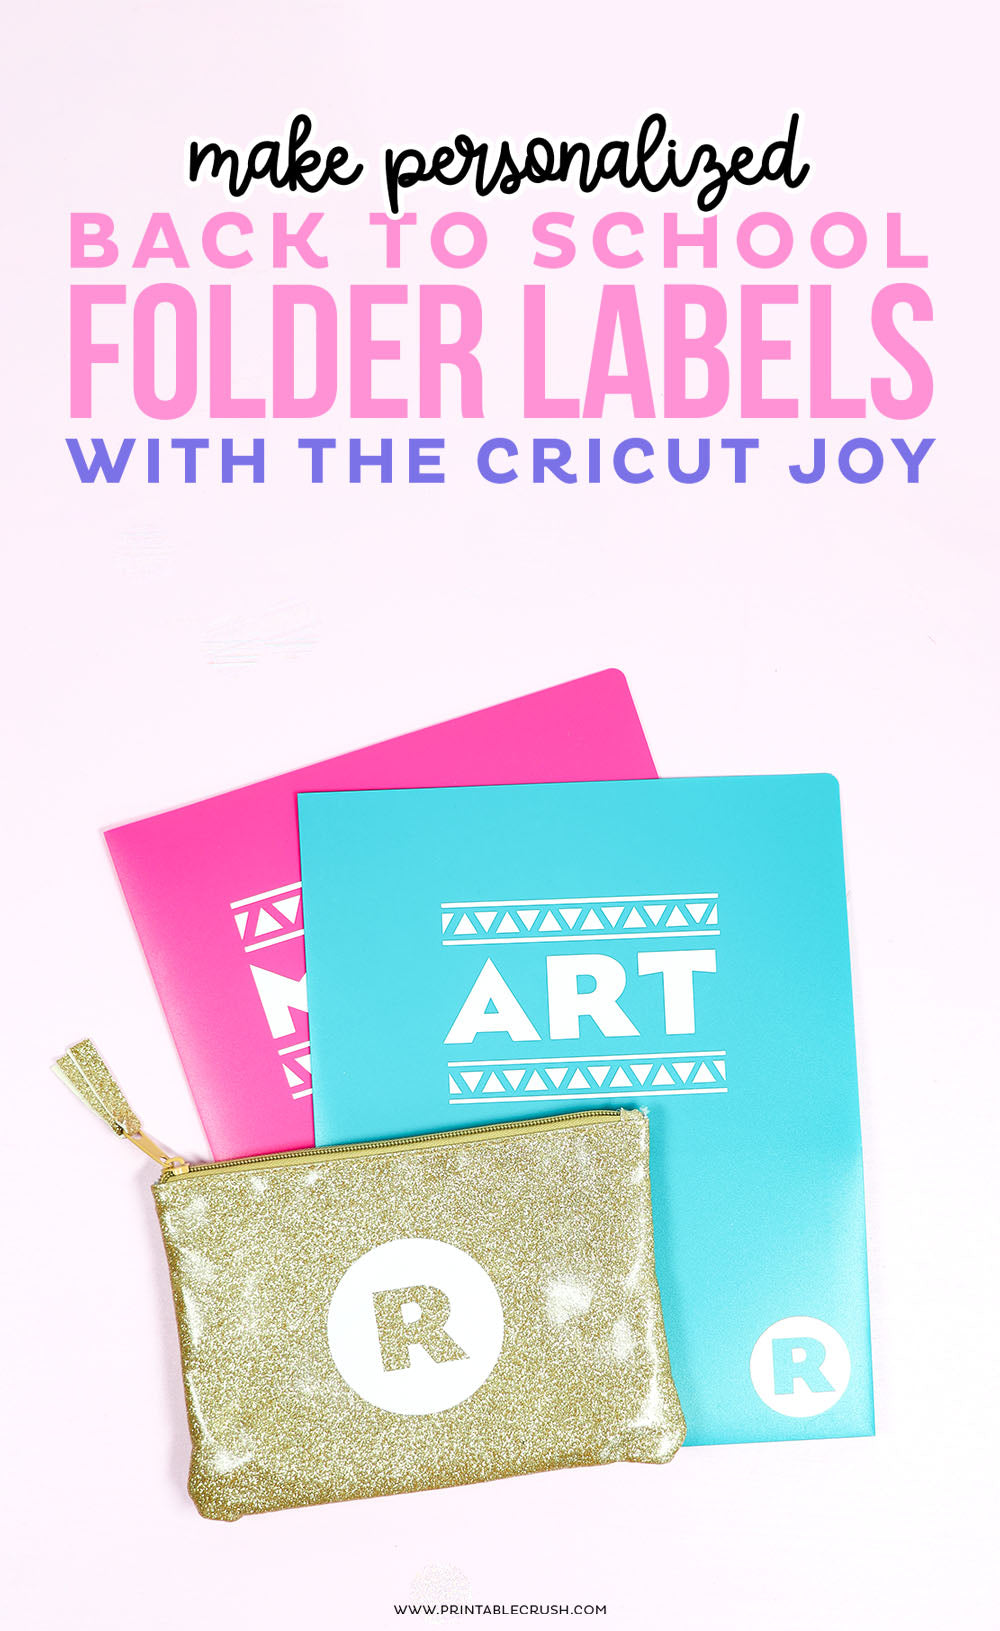 Personalized Back to School Folders with the Cricut Joy